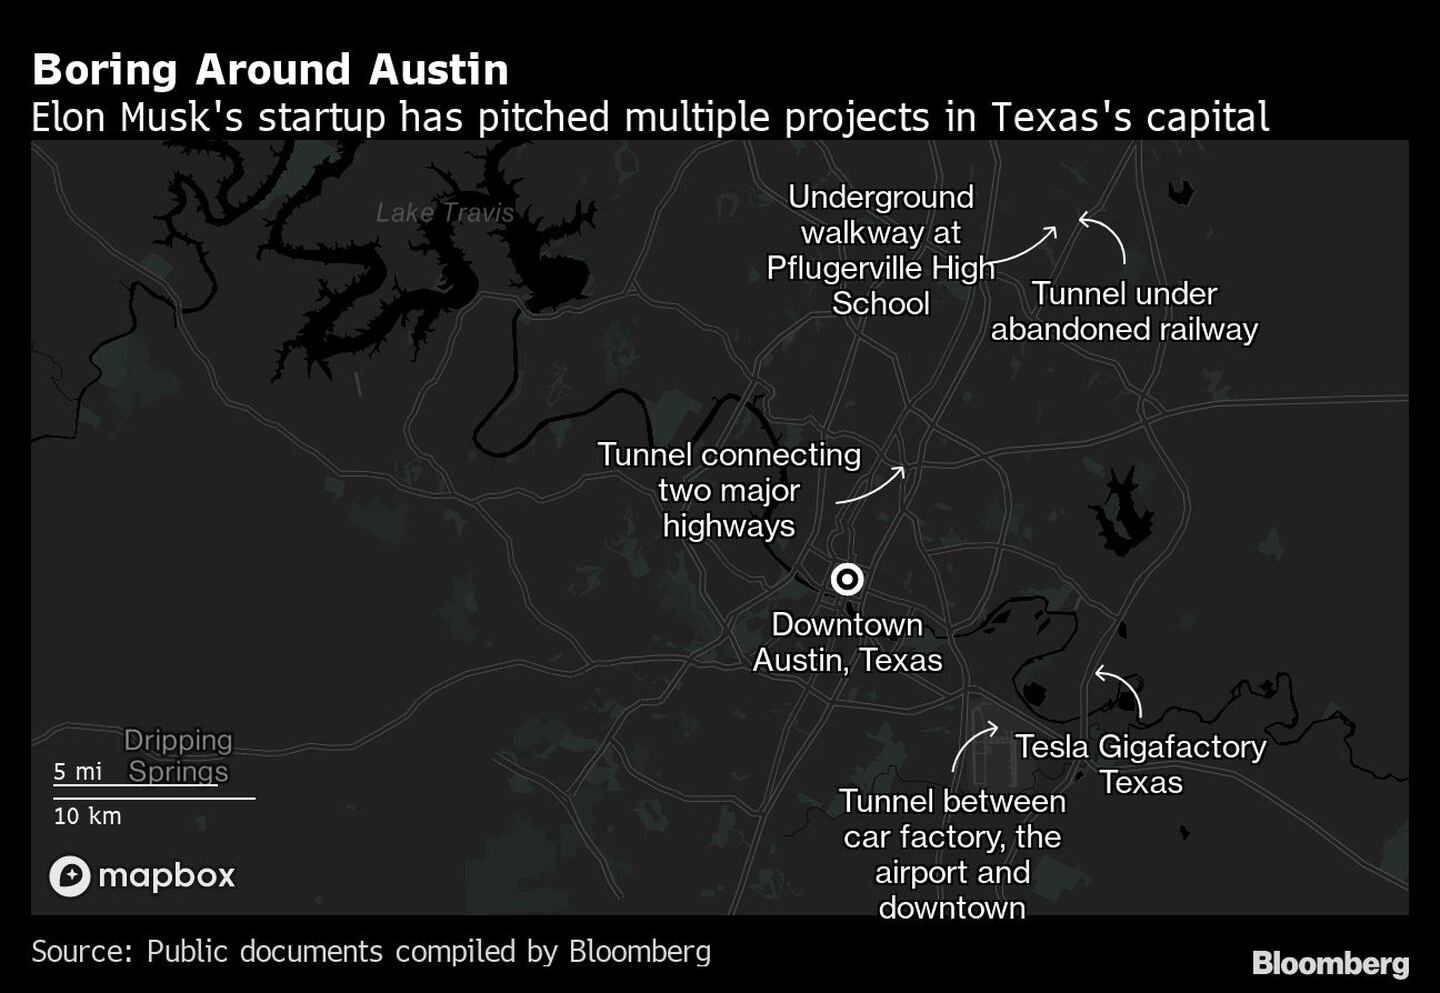 Boring Around Austin | Elon Musk's startup has pitched multiple projects in Texas's capitaldfd